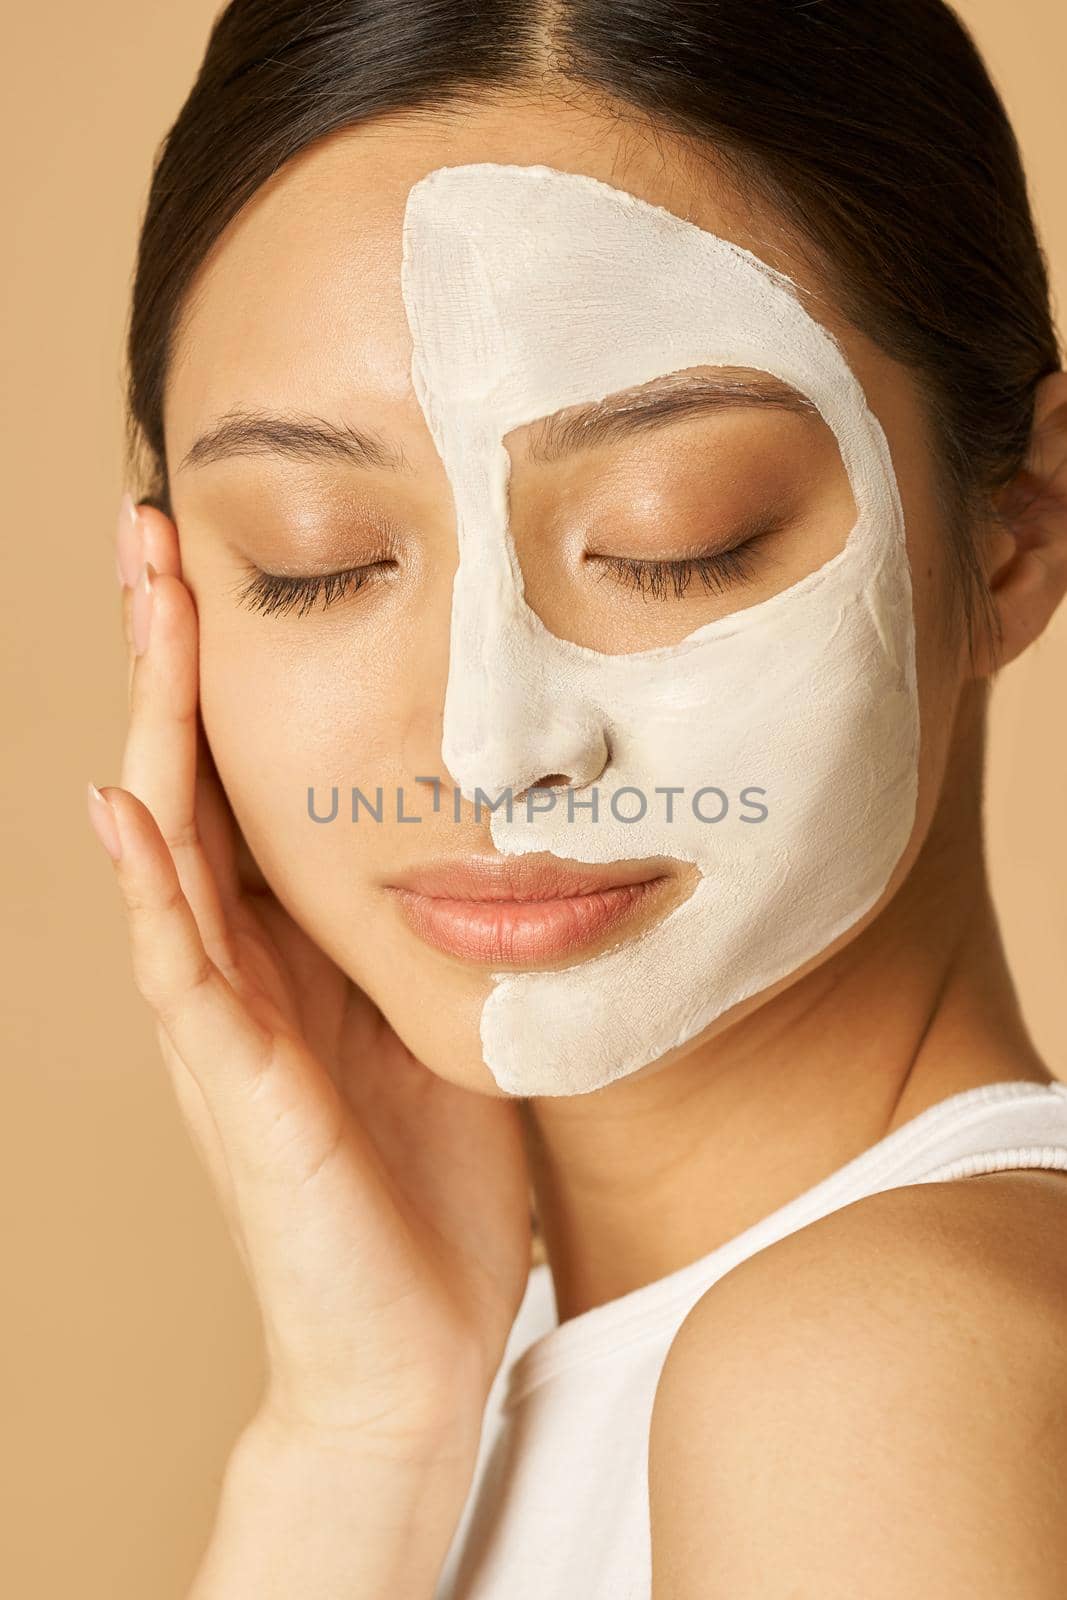 Relaxed young woman with facial mask applied on half of her face receiving spa treatments, posing for camera with eyes closed isolated over beige background by friendsstock